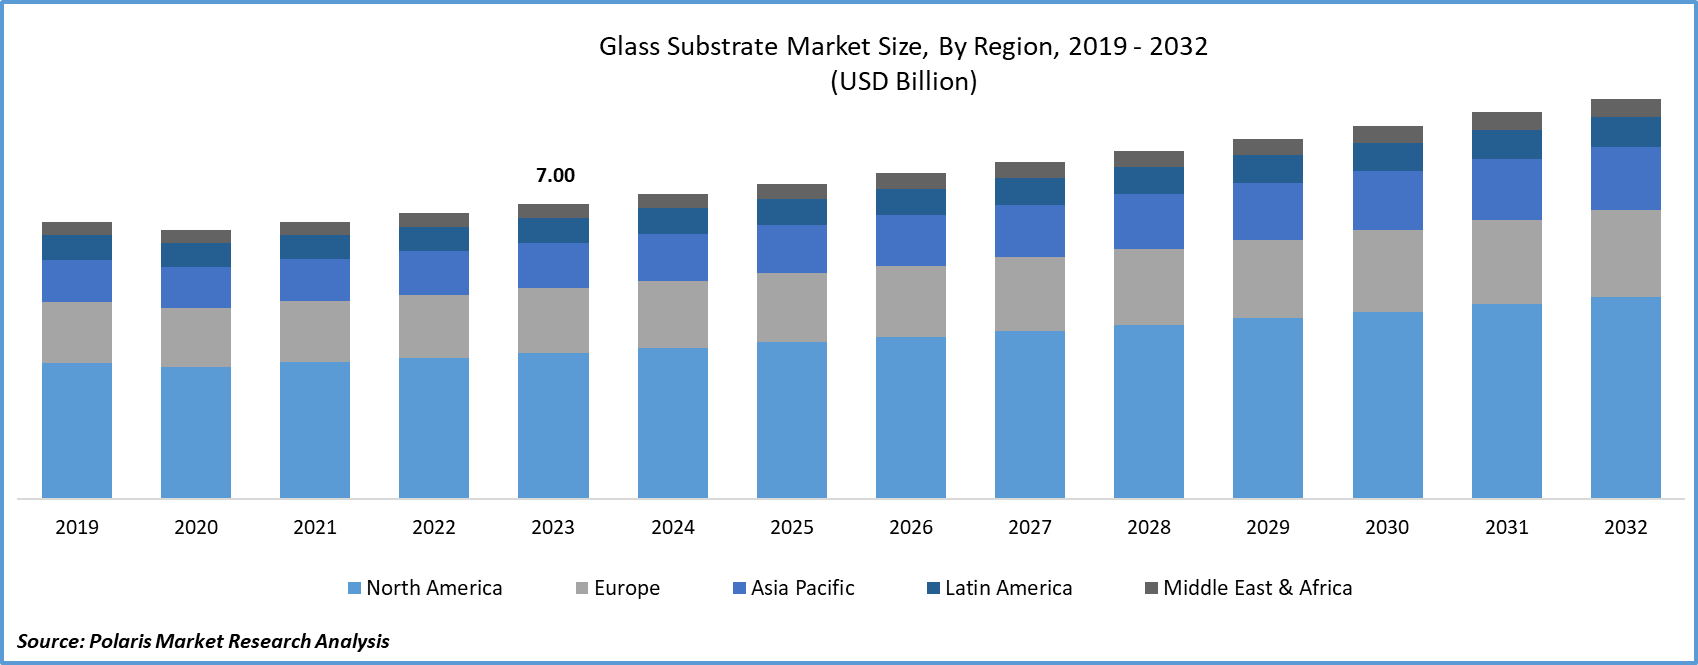 Glass Substrate Market Size